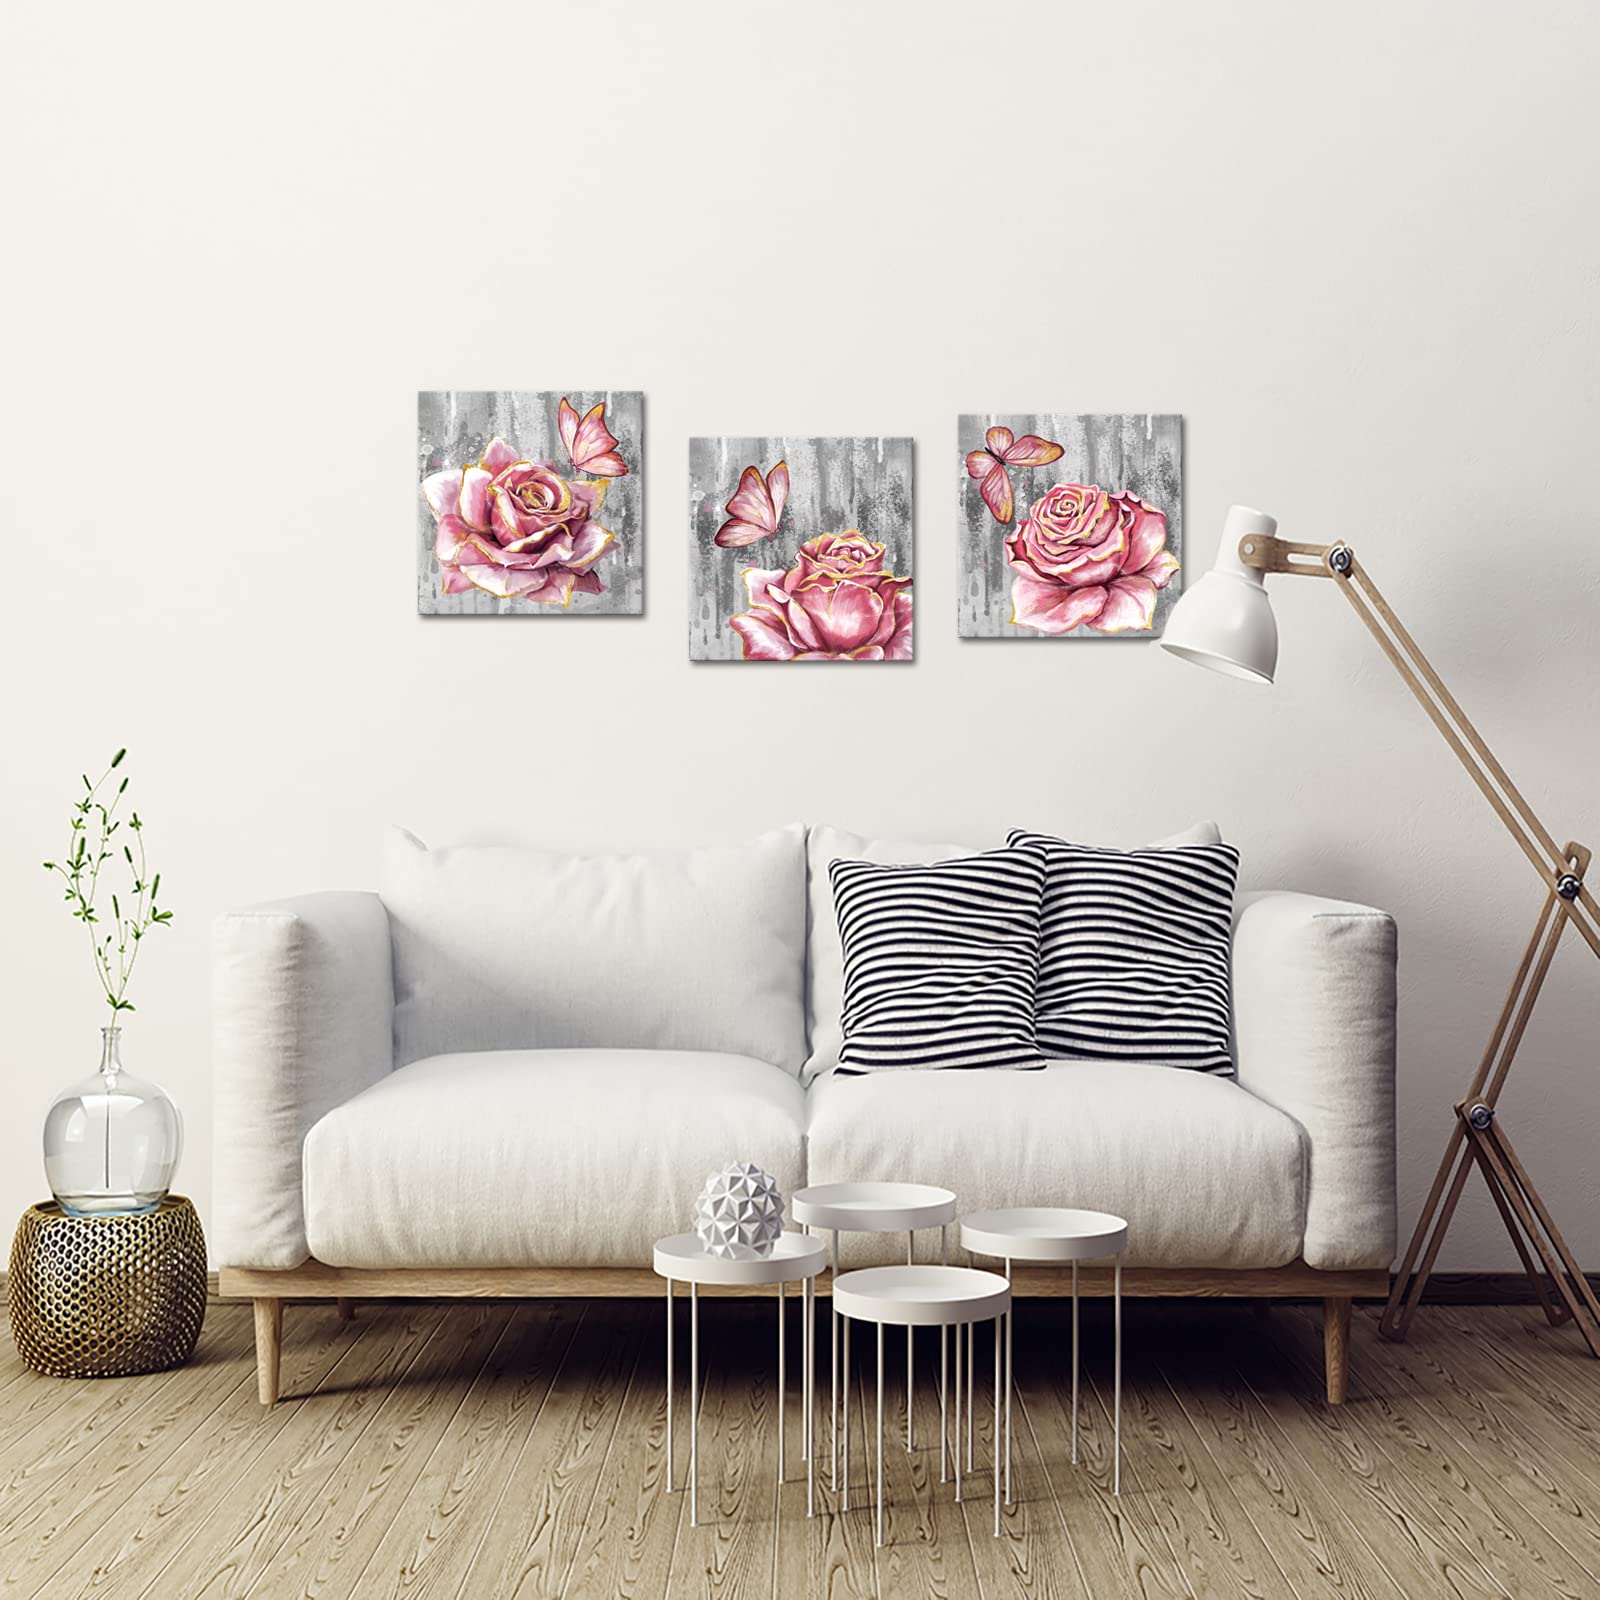 sechars 3 Panel Pink Rose Flower Wall Art Paintings Floral with Butterfly Prints on Grey Canvas Picture Wall Decoration Framed Trendy Gold and Pink Bathroom Bedroom Decor Artwork 12